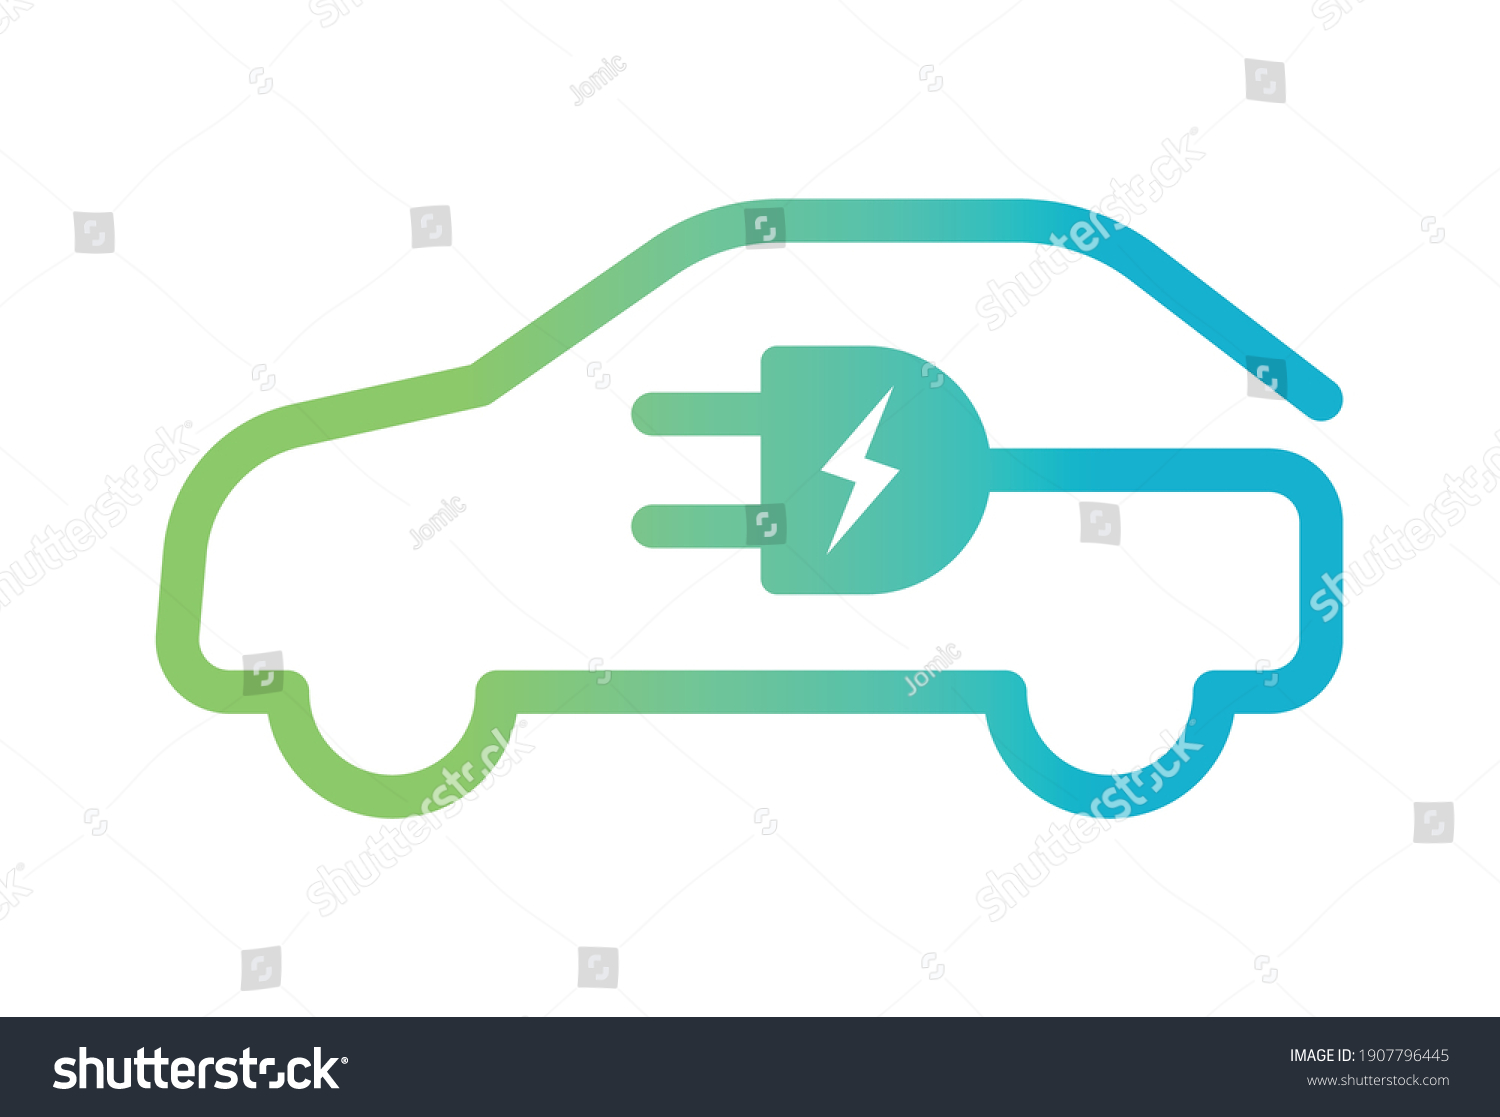 Electric car with plug icon symbol, EV car, Green hybrid vehicles charging point logotype, Eco friendly vehicle concept, Vector illustration #1907796445